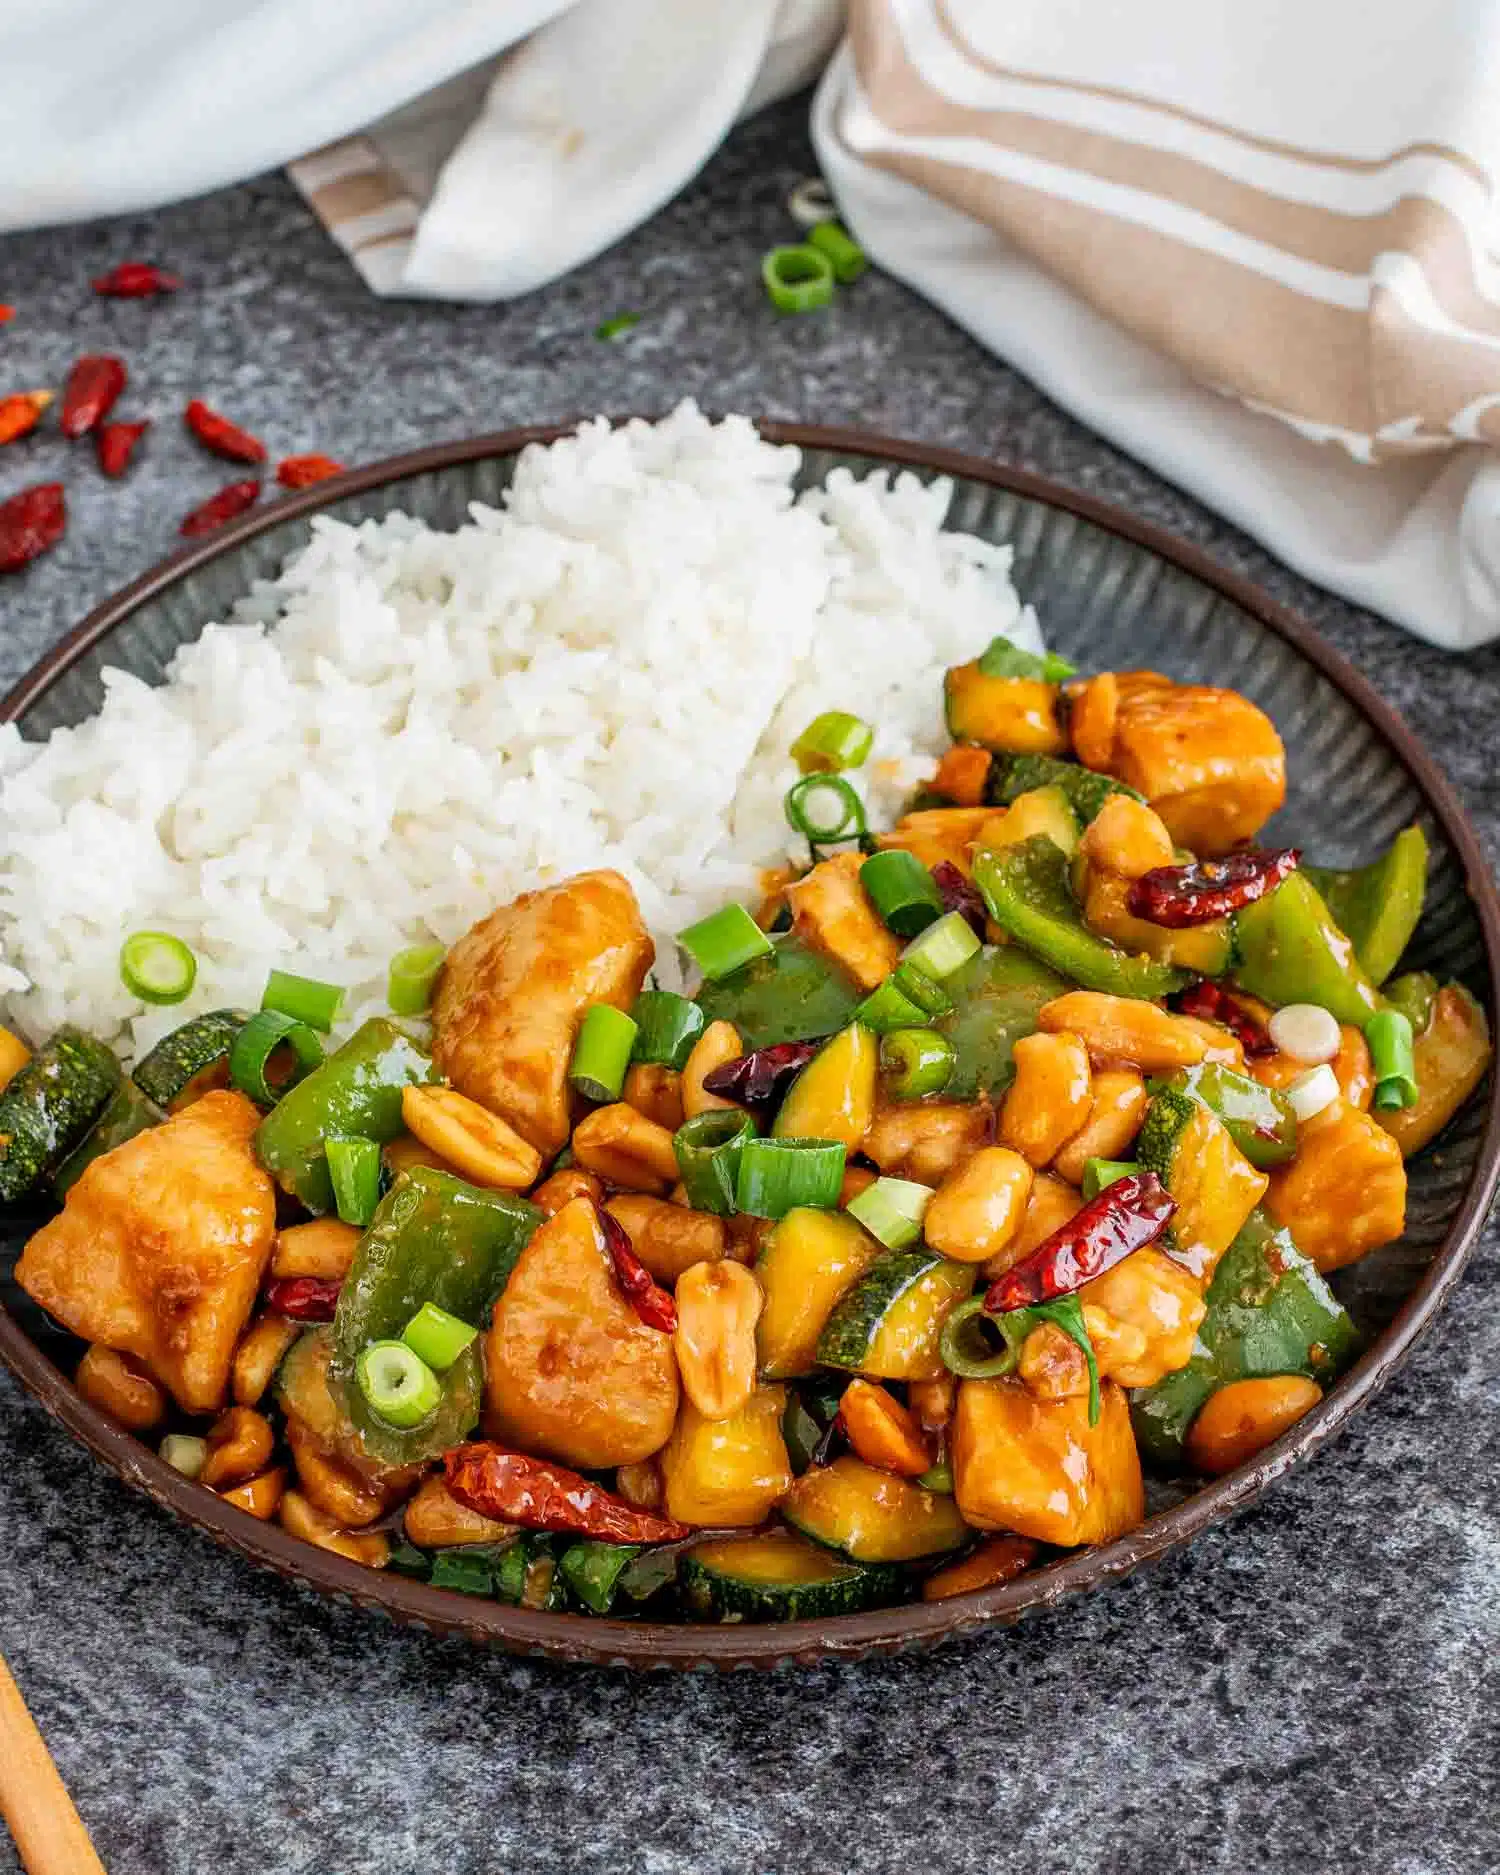 kung pao chicken with rice on a metal plate.